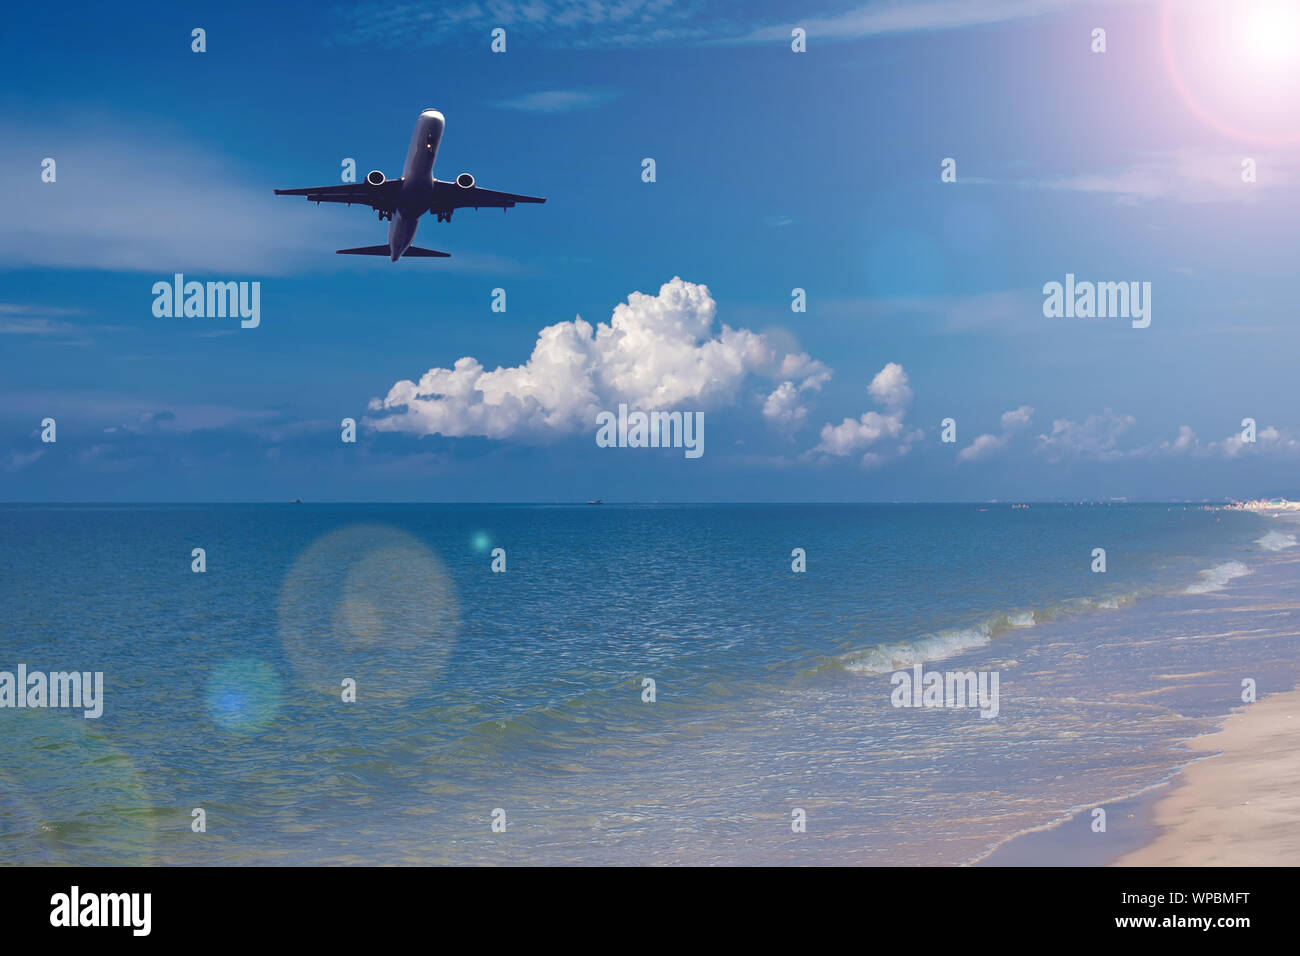 Plane in the sky over sea. Holiday and travel concept Stock Photo